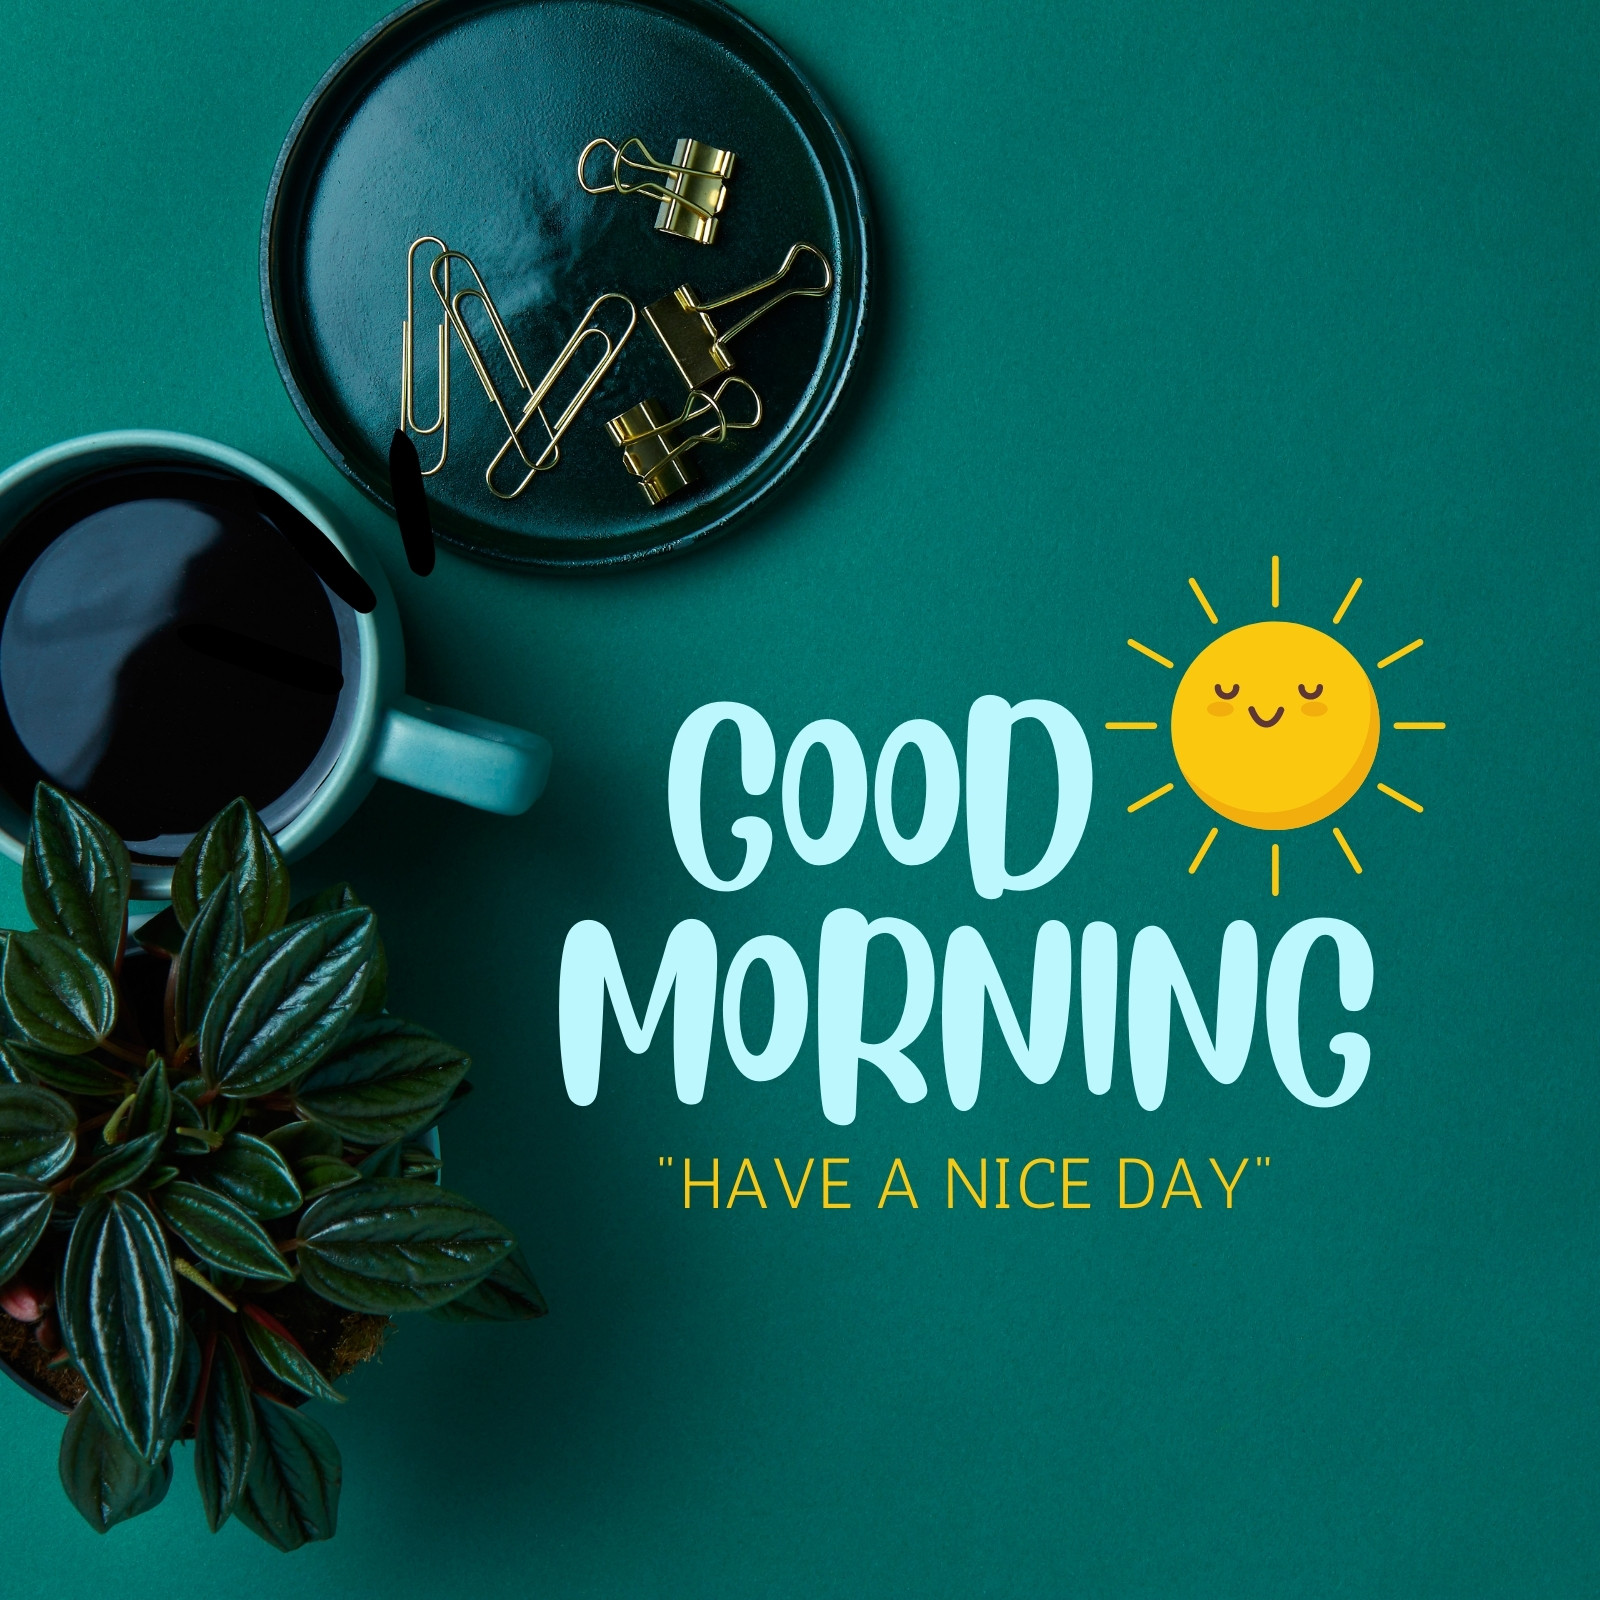 Good Morning Wishes on the App Store